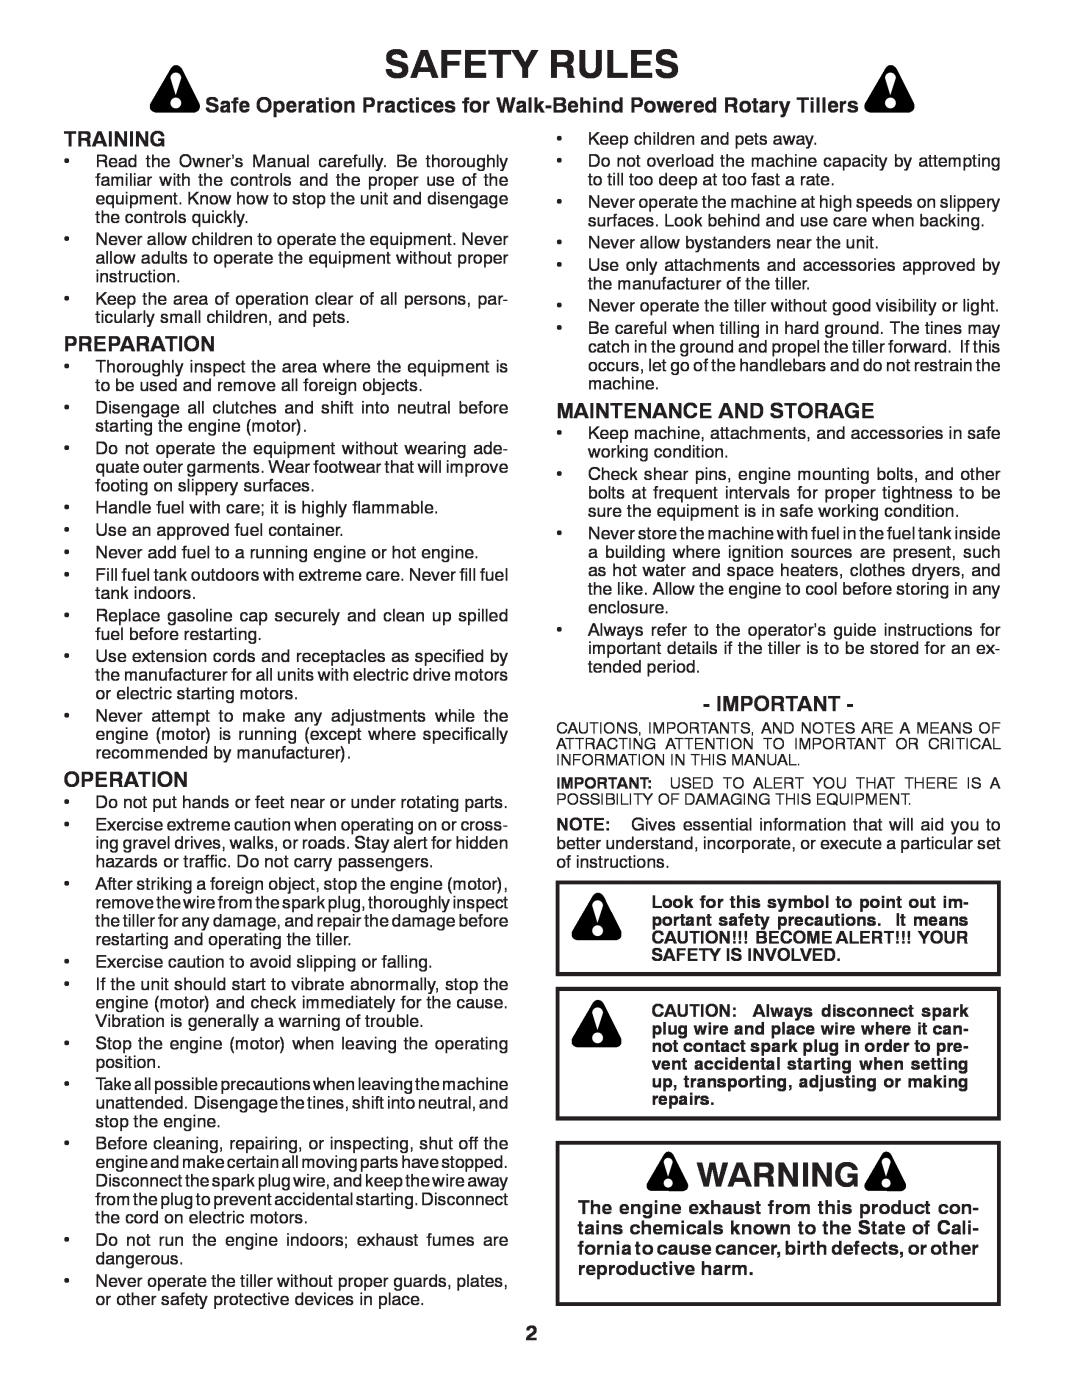 Poulan HDF900 manual Safety Rules, Training, Preparation, Operation, Maintenance And Storage 